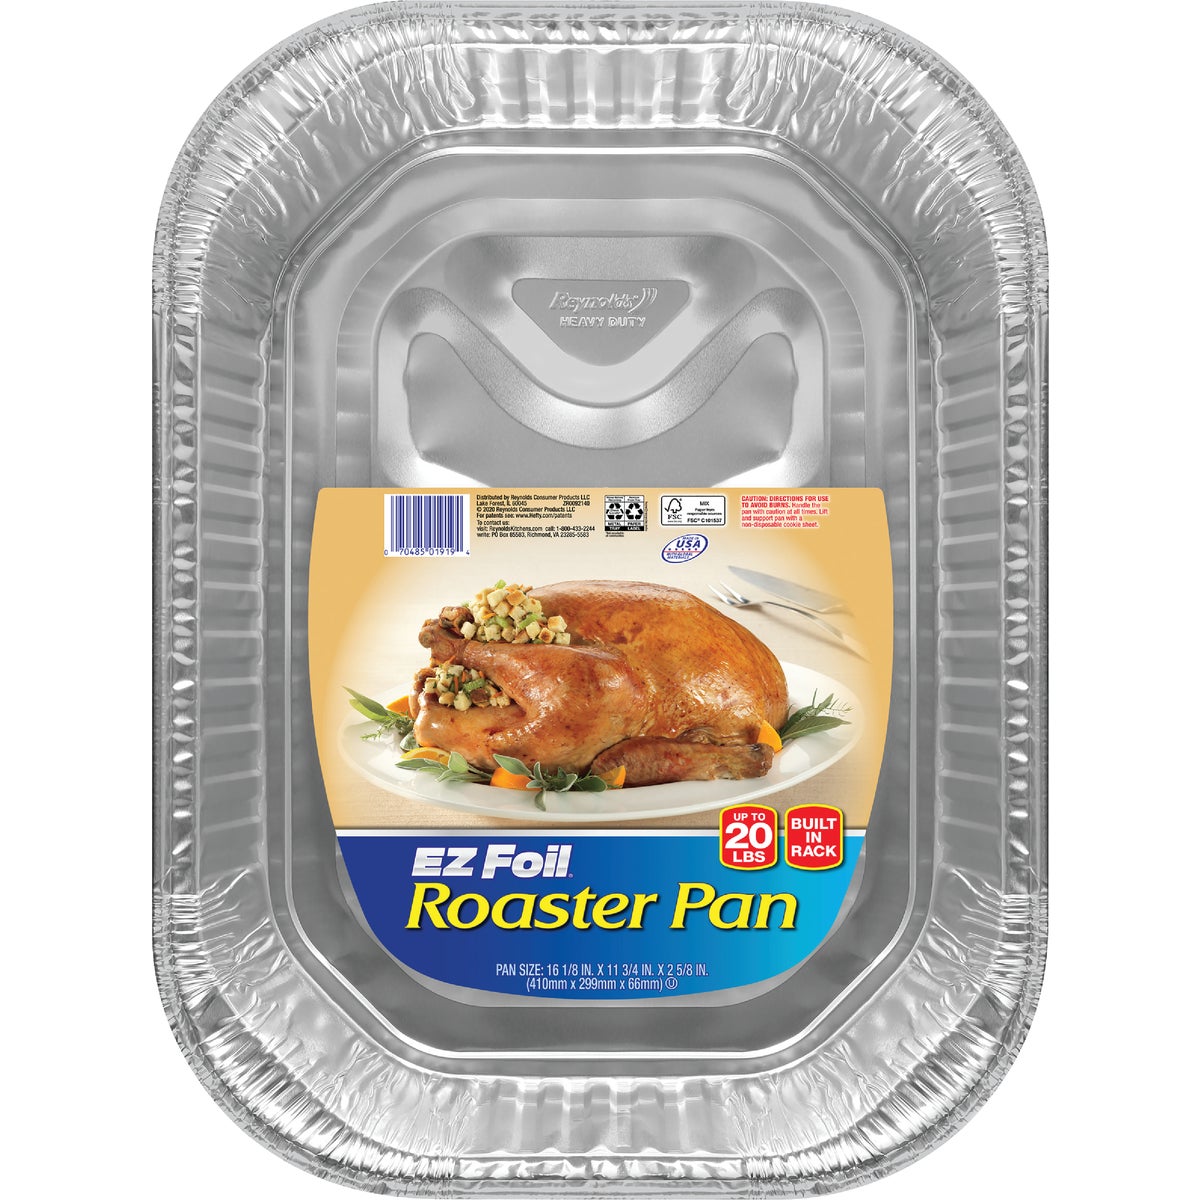 Item 621919, The perfect size pan for roasting beef, poultry, pork, and fish.